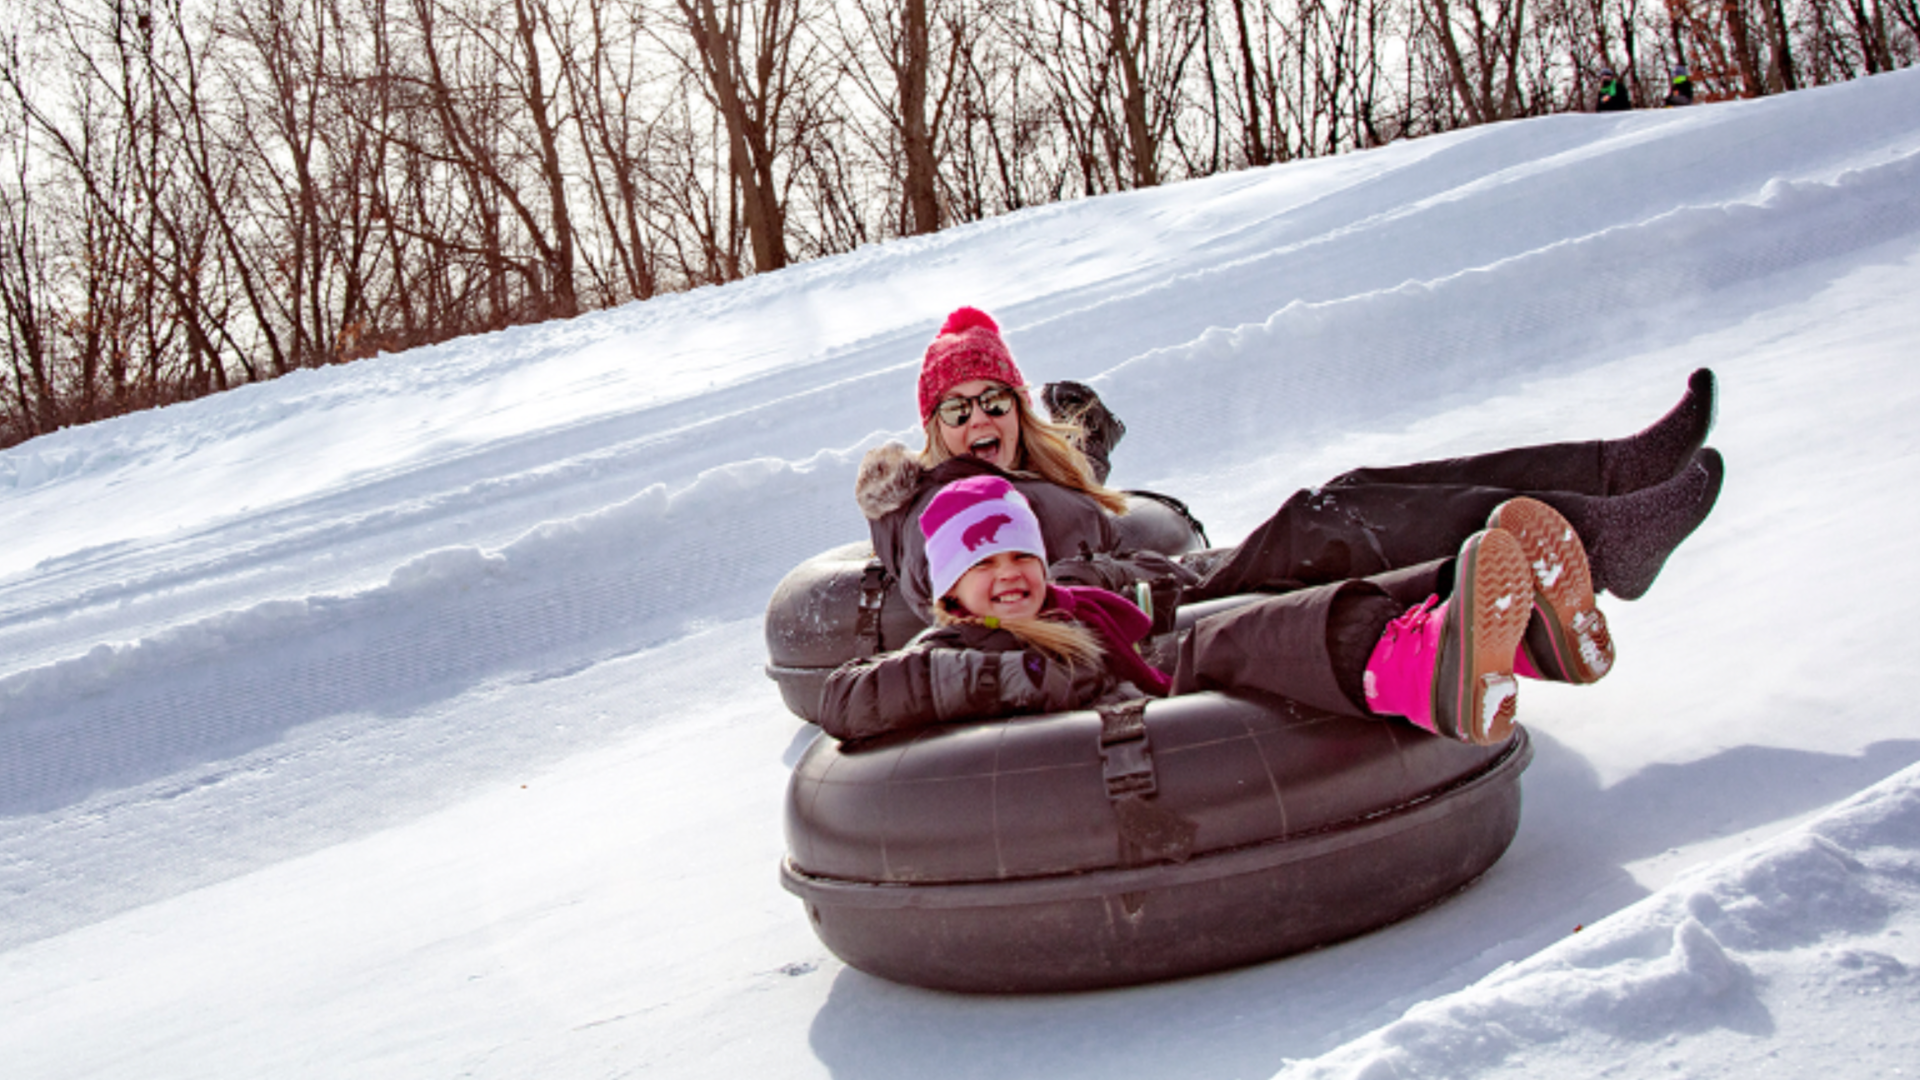 A photo of snow tubing.